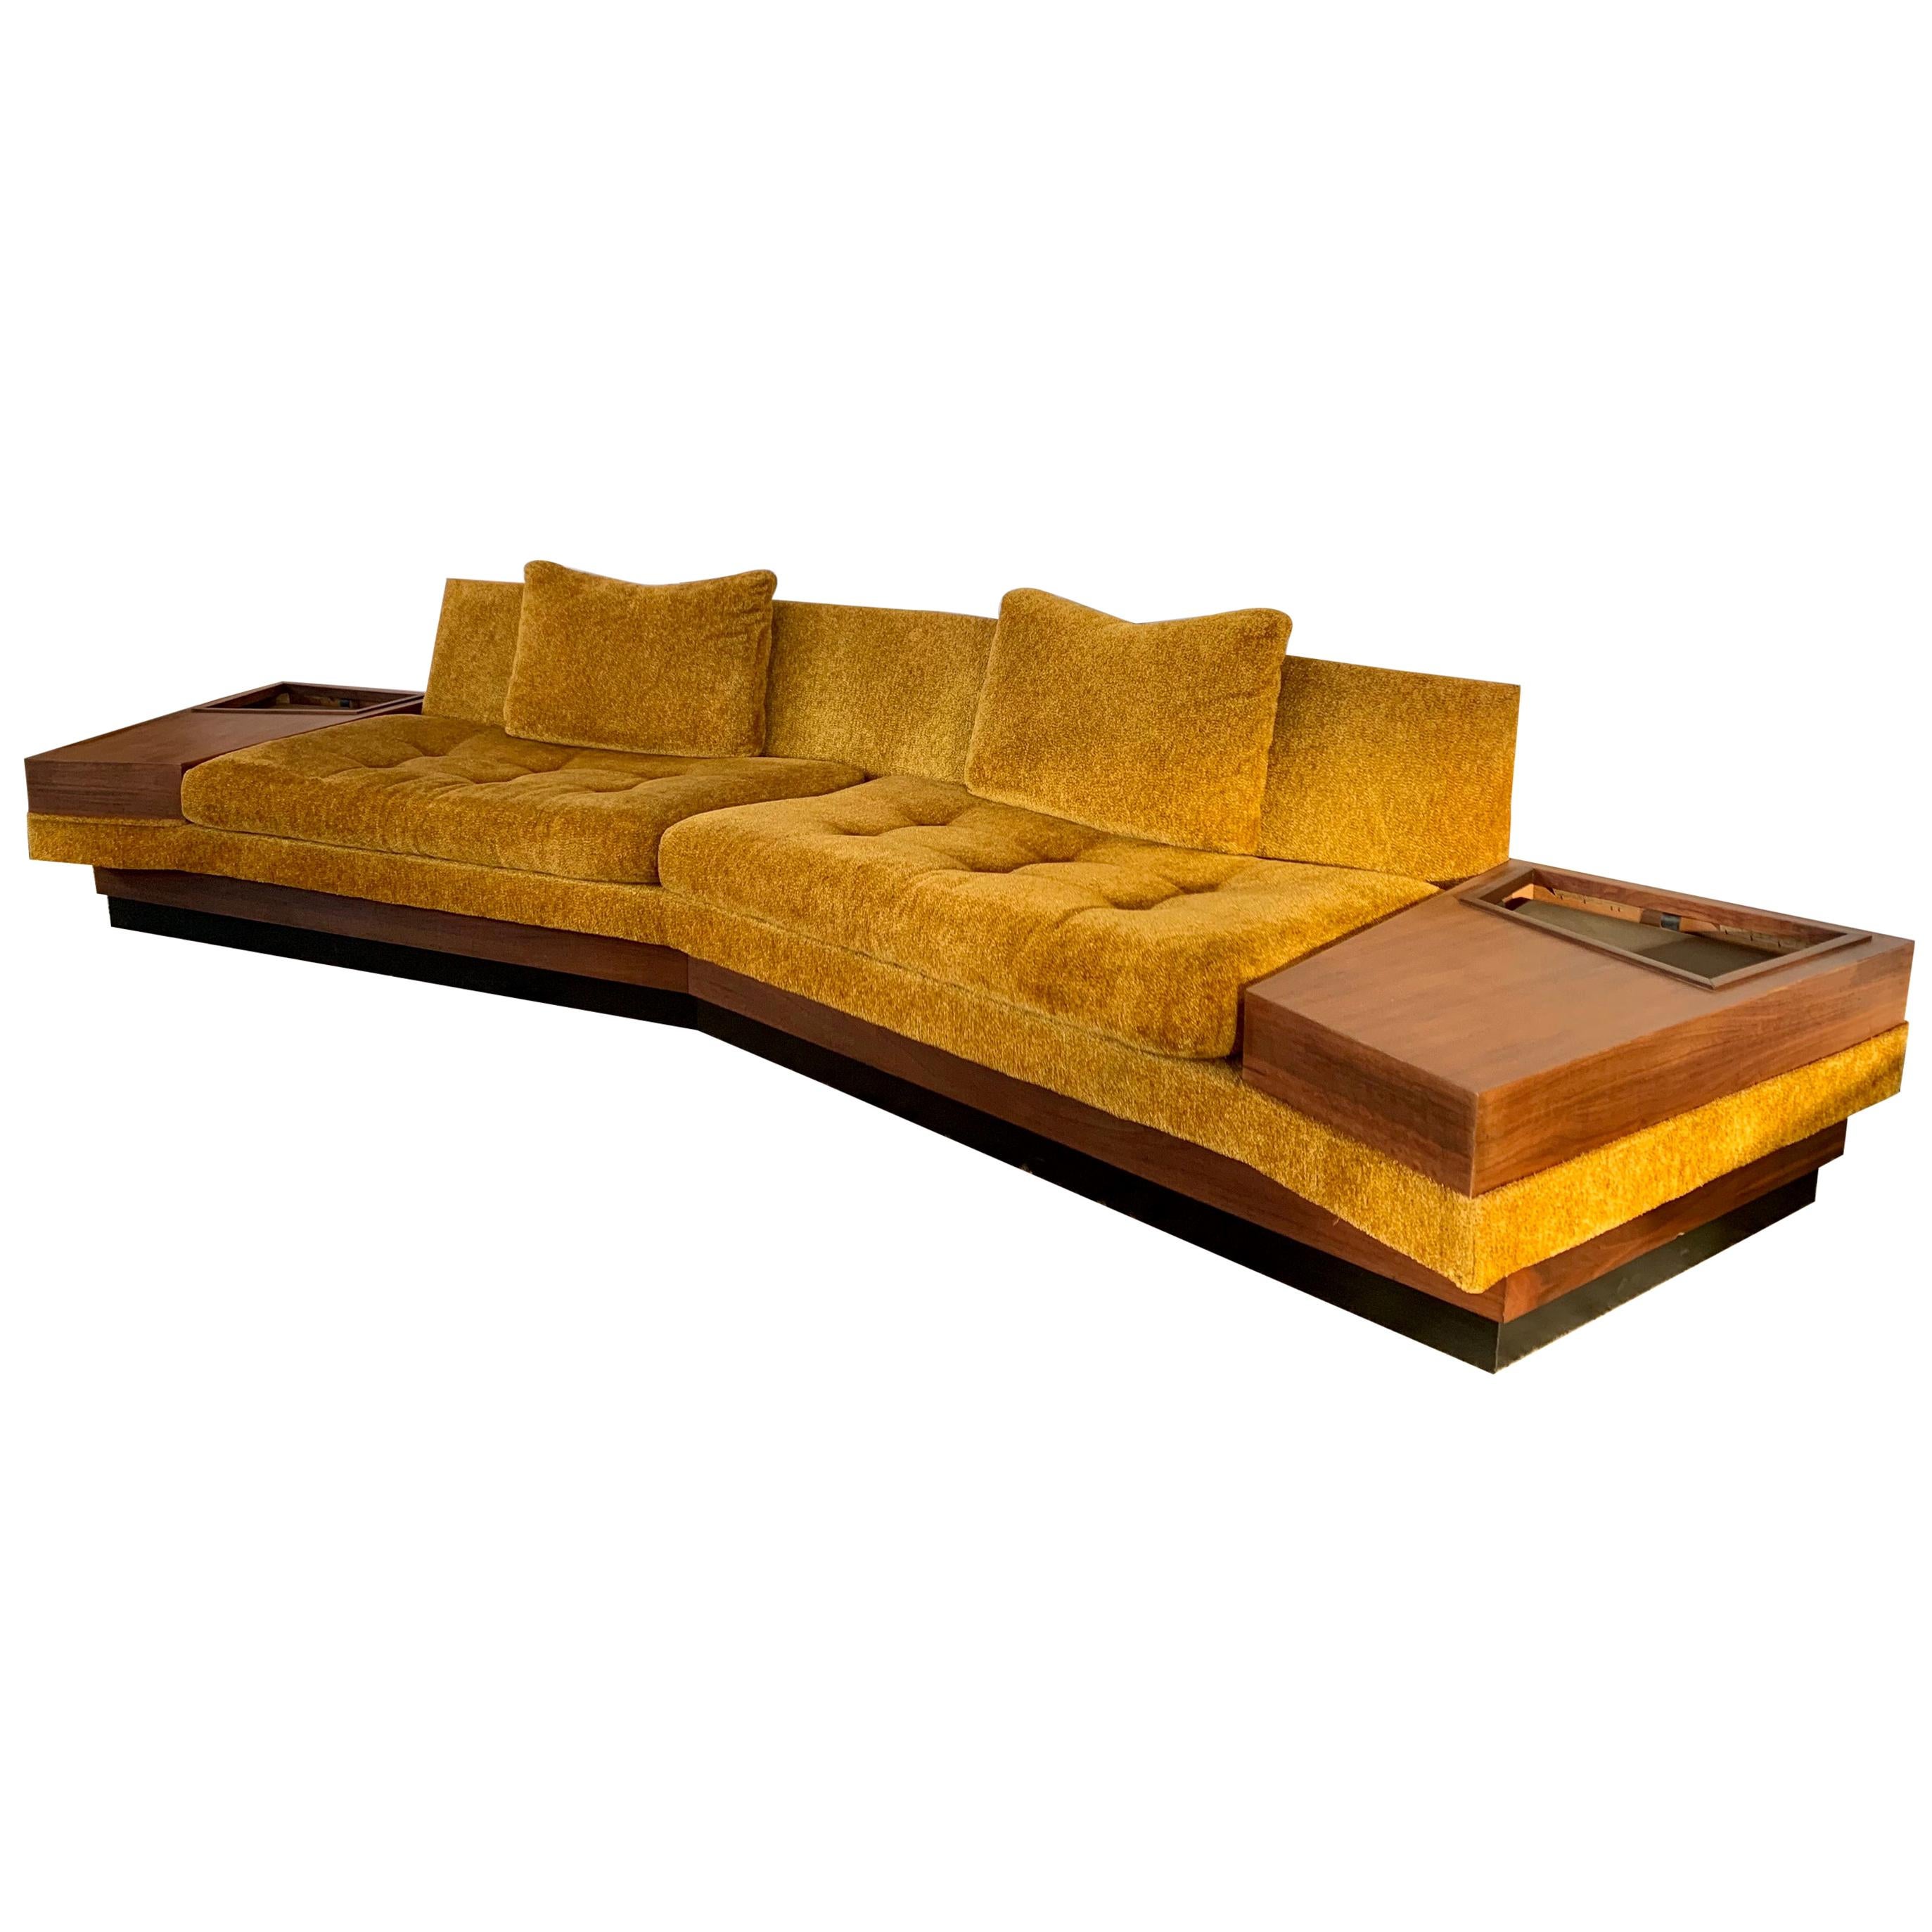 Signed Adrian Pearsall for Craft Associates Boomerang Sofa One-Piece